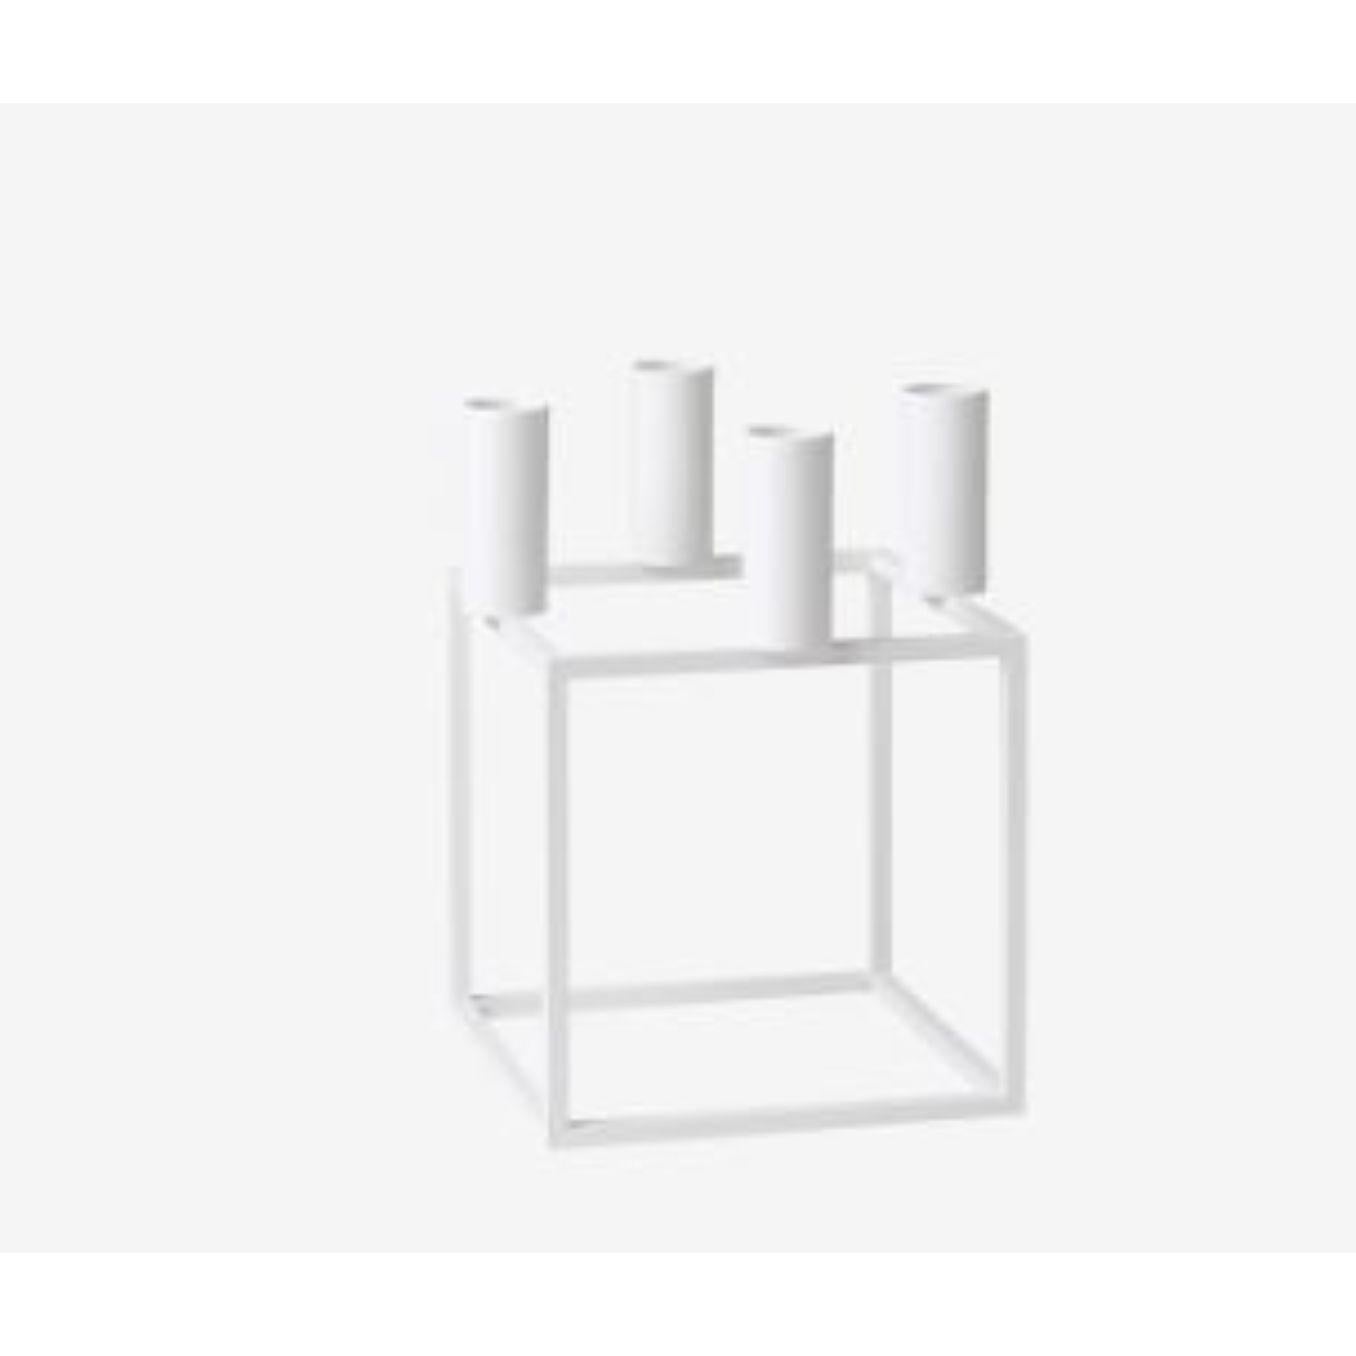 White Kubus 4 candle holder by Lassen
Dimensions: D 14 x W 14 x H 20 cm 
Materials: Metal 
Also available in different dimensions. 
Weight: 1.50 Kg

A new small wonder has seen the light of day. Kubus Micro is a stylish, smaller version of the